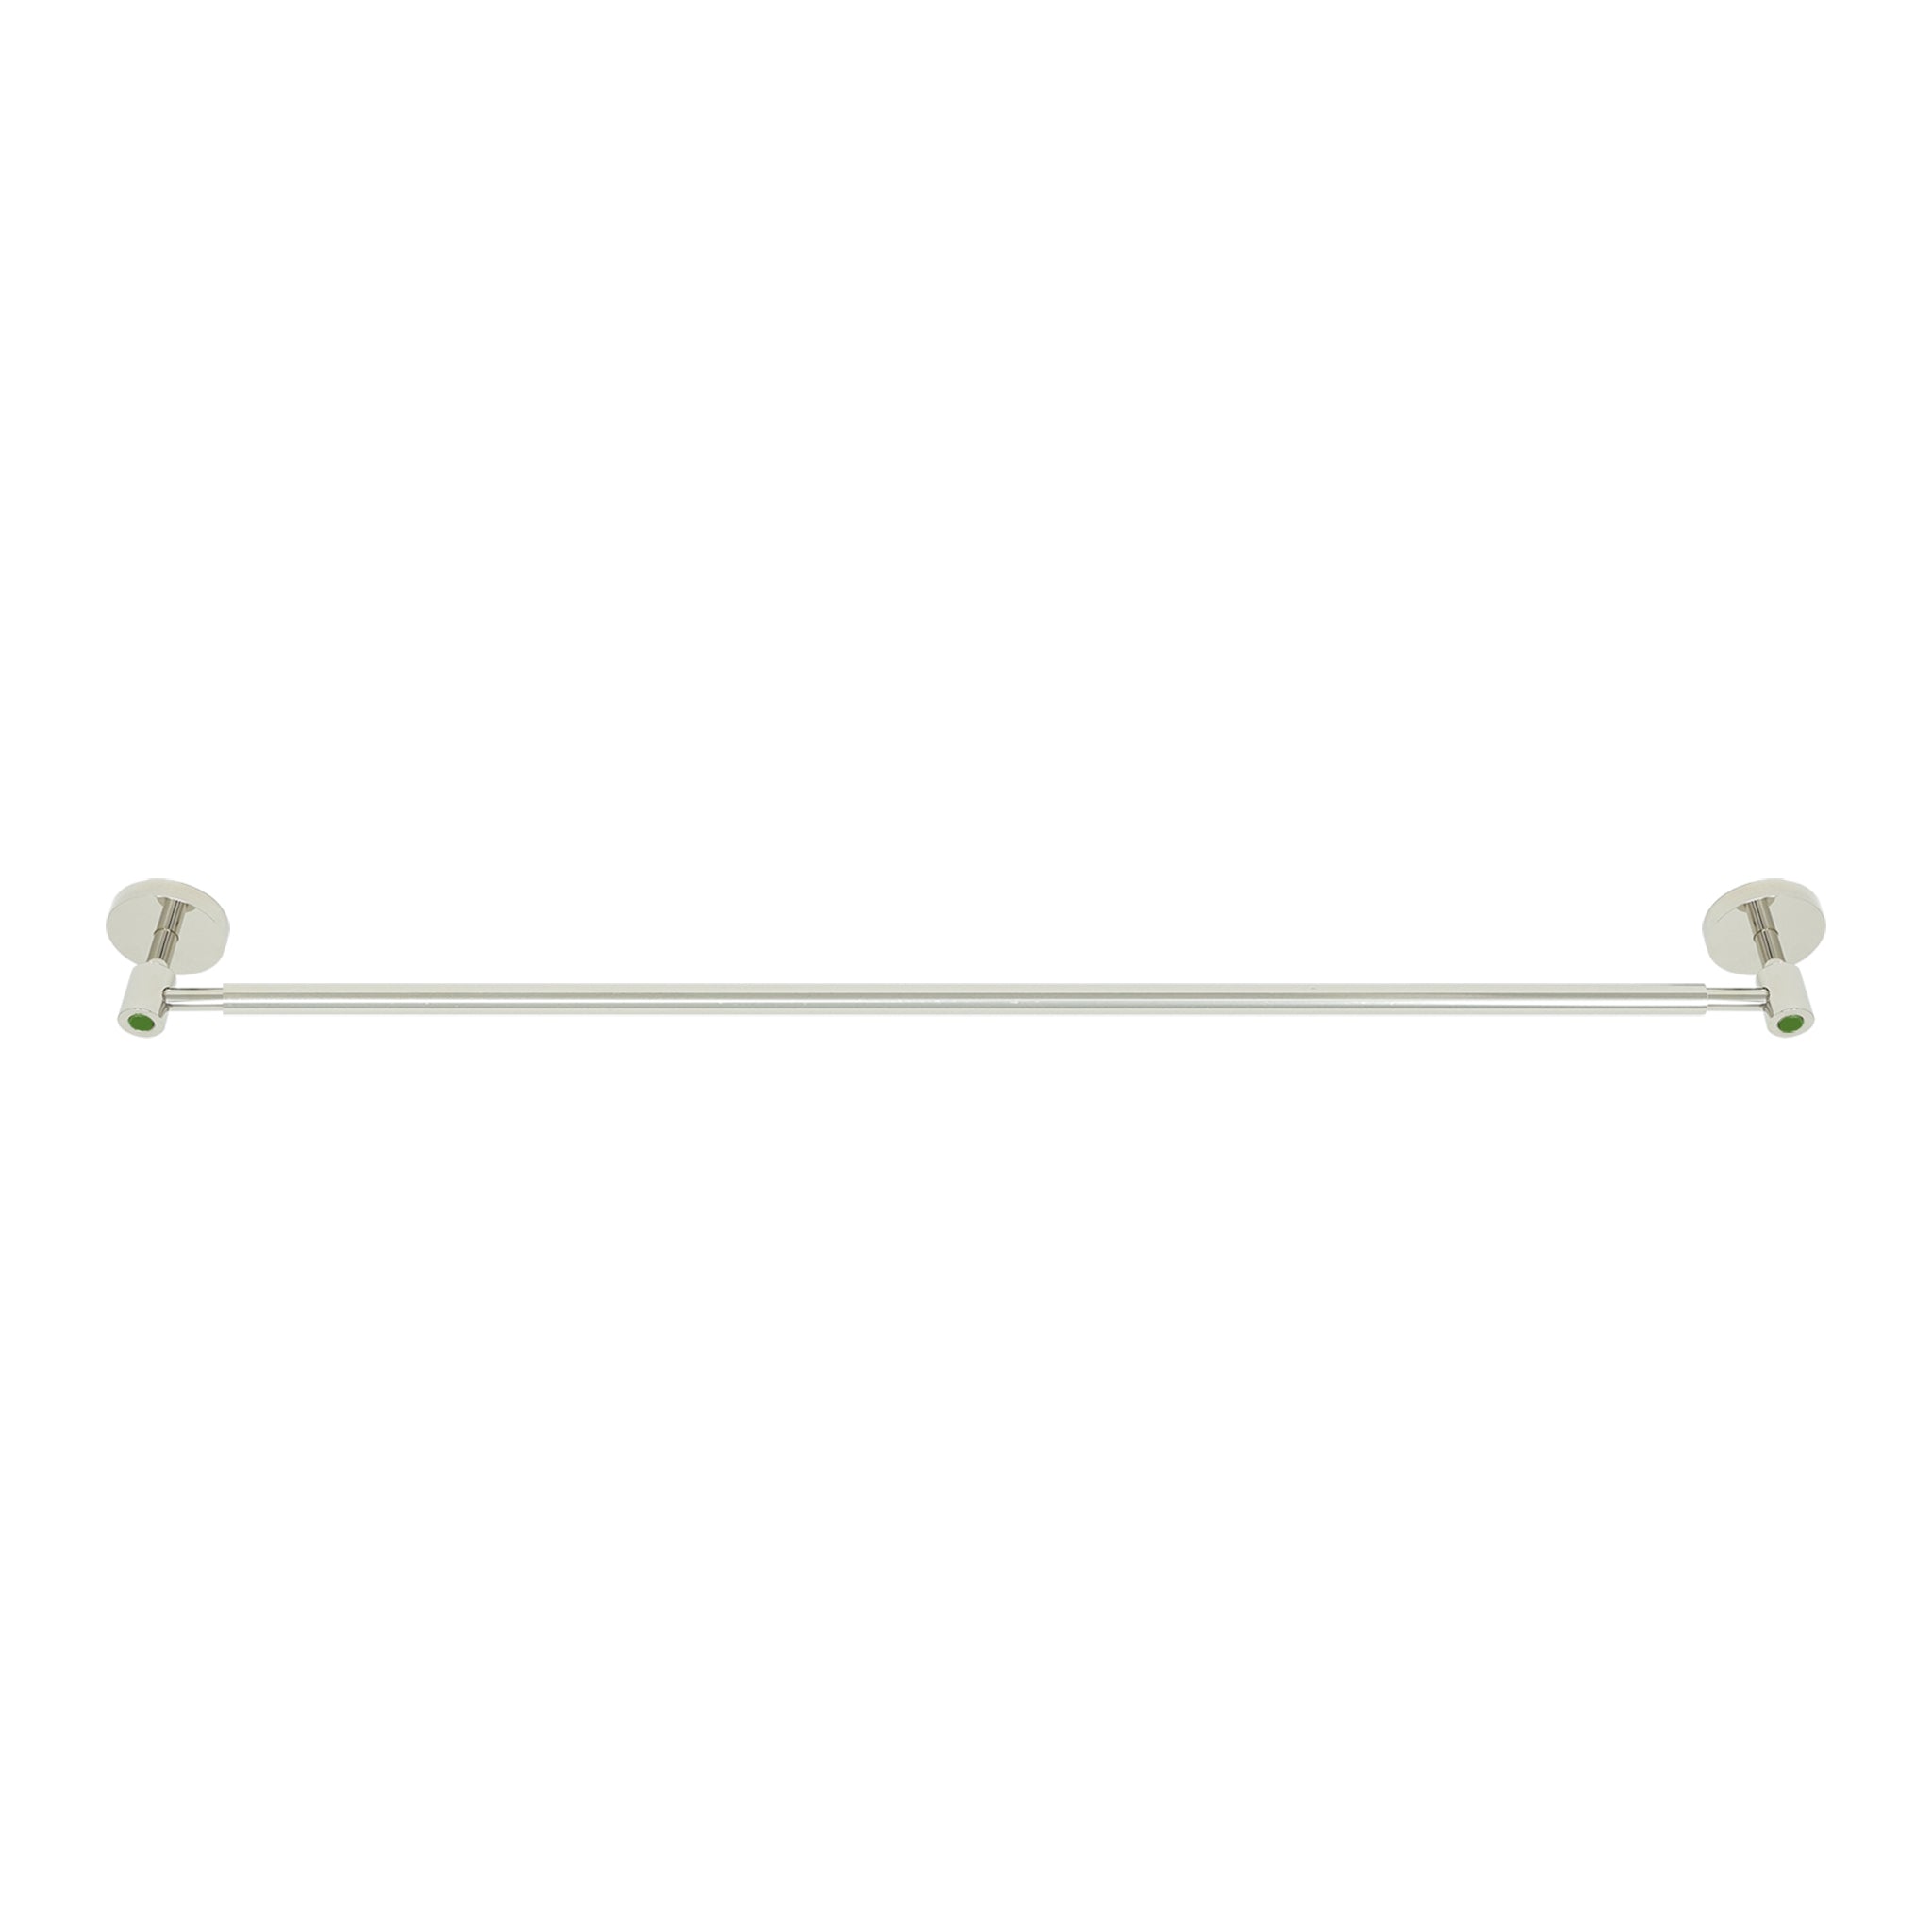 Nickel and lagoon color Head towel bar 24" Dutton Brown hardware